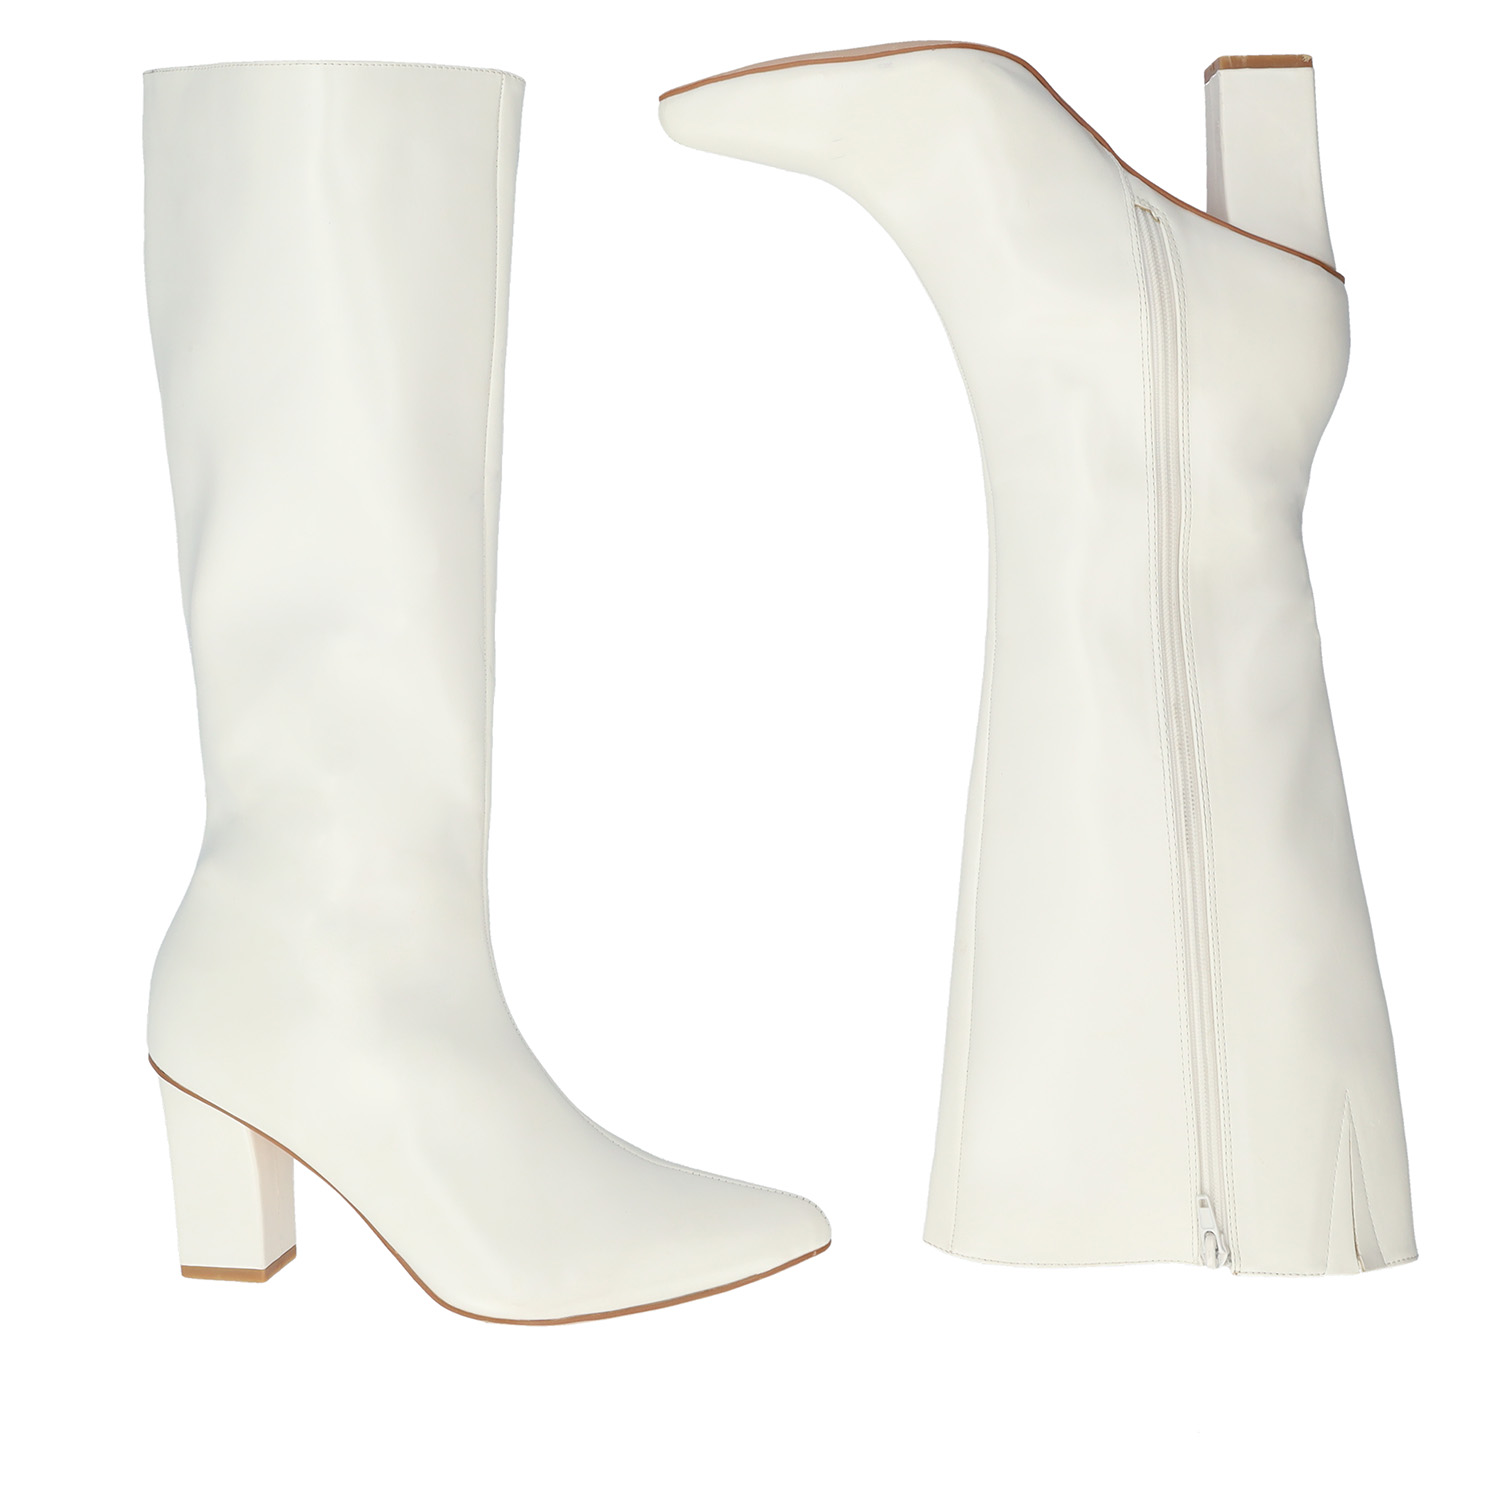 Smooth white colored faux leather boots 